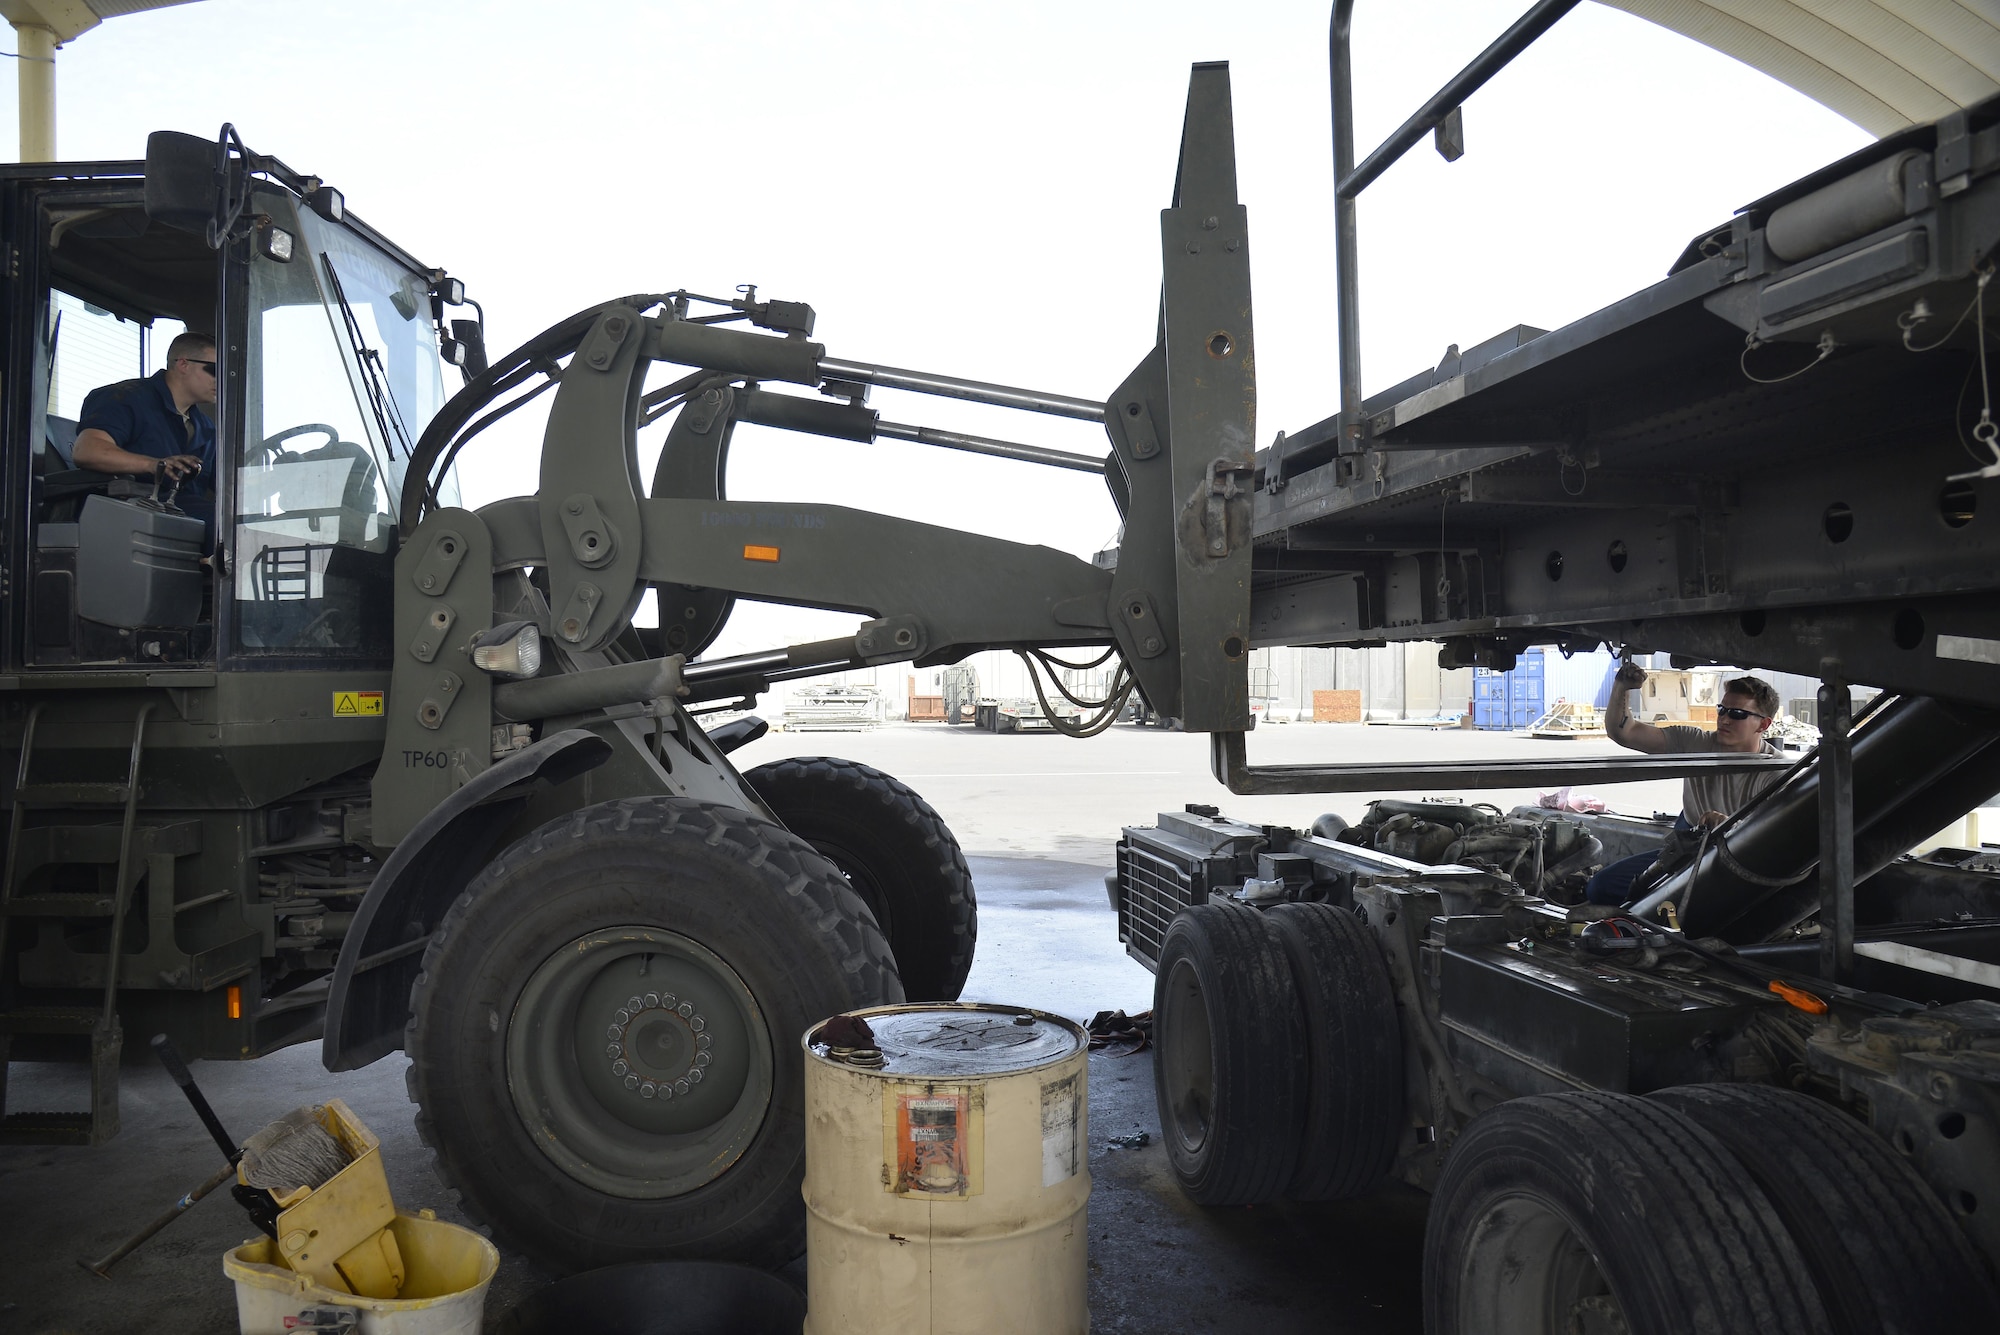 Staff Sgt. Jason, left, and Senior Airman Jacob, right, position an adverse terrain forklift vehicle underneath a 60K aircraft loader during maintenance at an undisclosed location in Southwest Asia May 24, 2015. The forklift was used to relieve weight off of the lift cylinder. Jason is the noncommissioned officer in charge of material handling equipment and Jacob is a MHE mechanic. Both are assigned to the Expeditionary Logistics Readiness Squadron. Due to safety and security reasons, last names and unit designators were removed. (U.S. Air Force photo/Tech. Sgt. Christopher Boitz) 